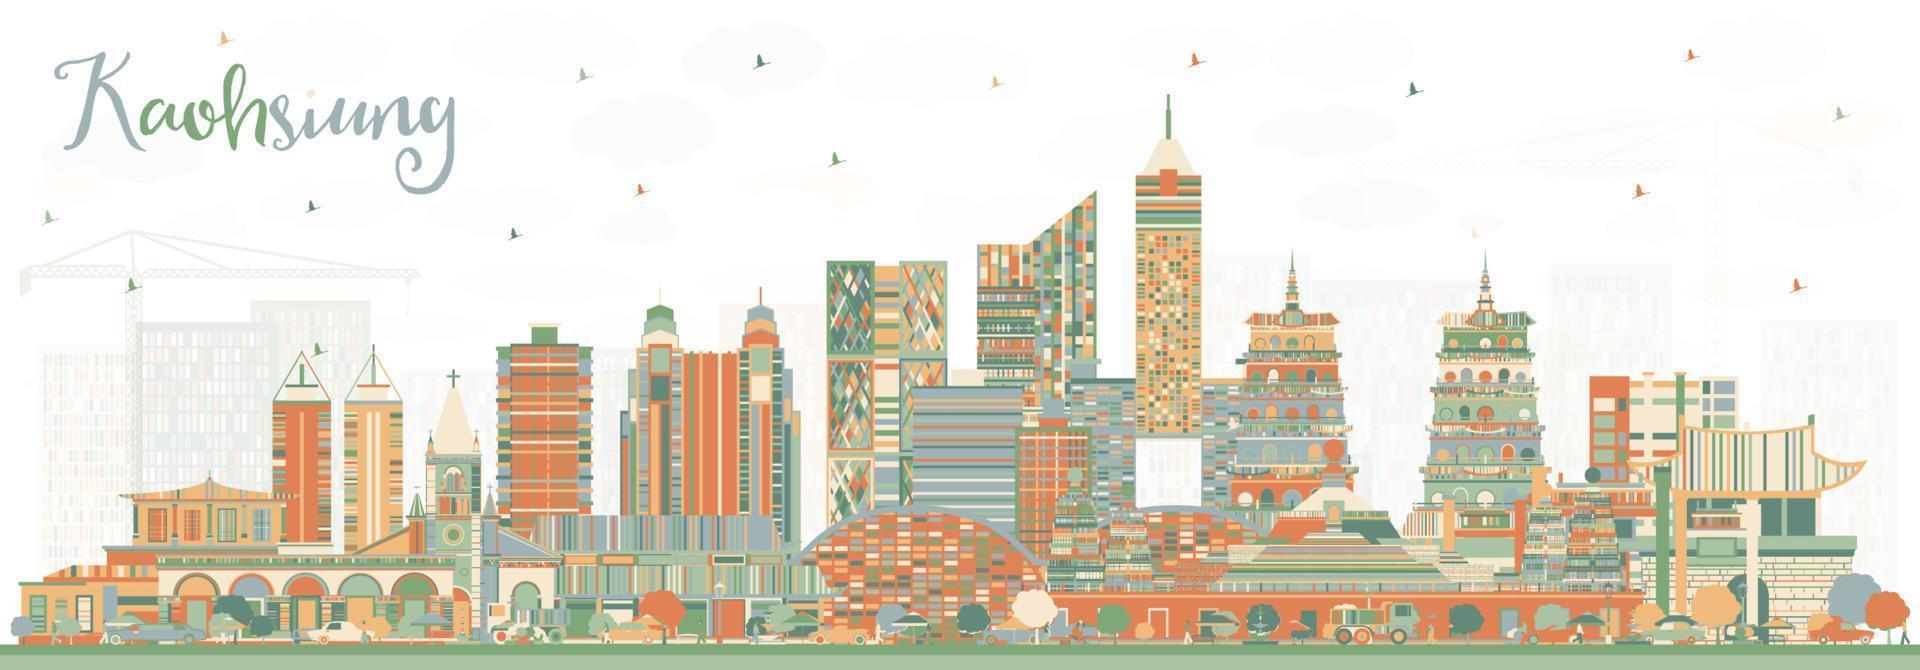 Kaohsiung Taiwan City Skyline with Color Buildings. vector